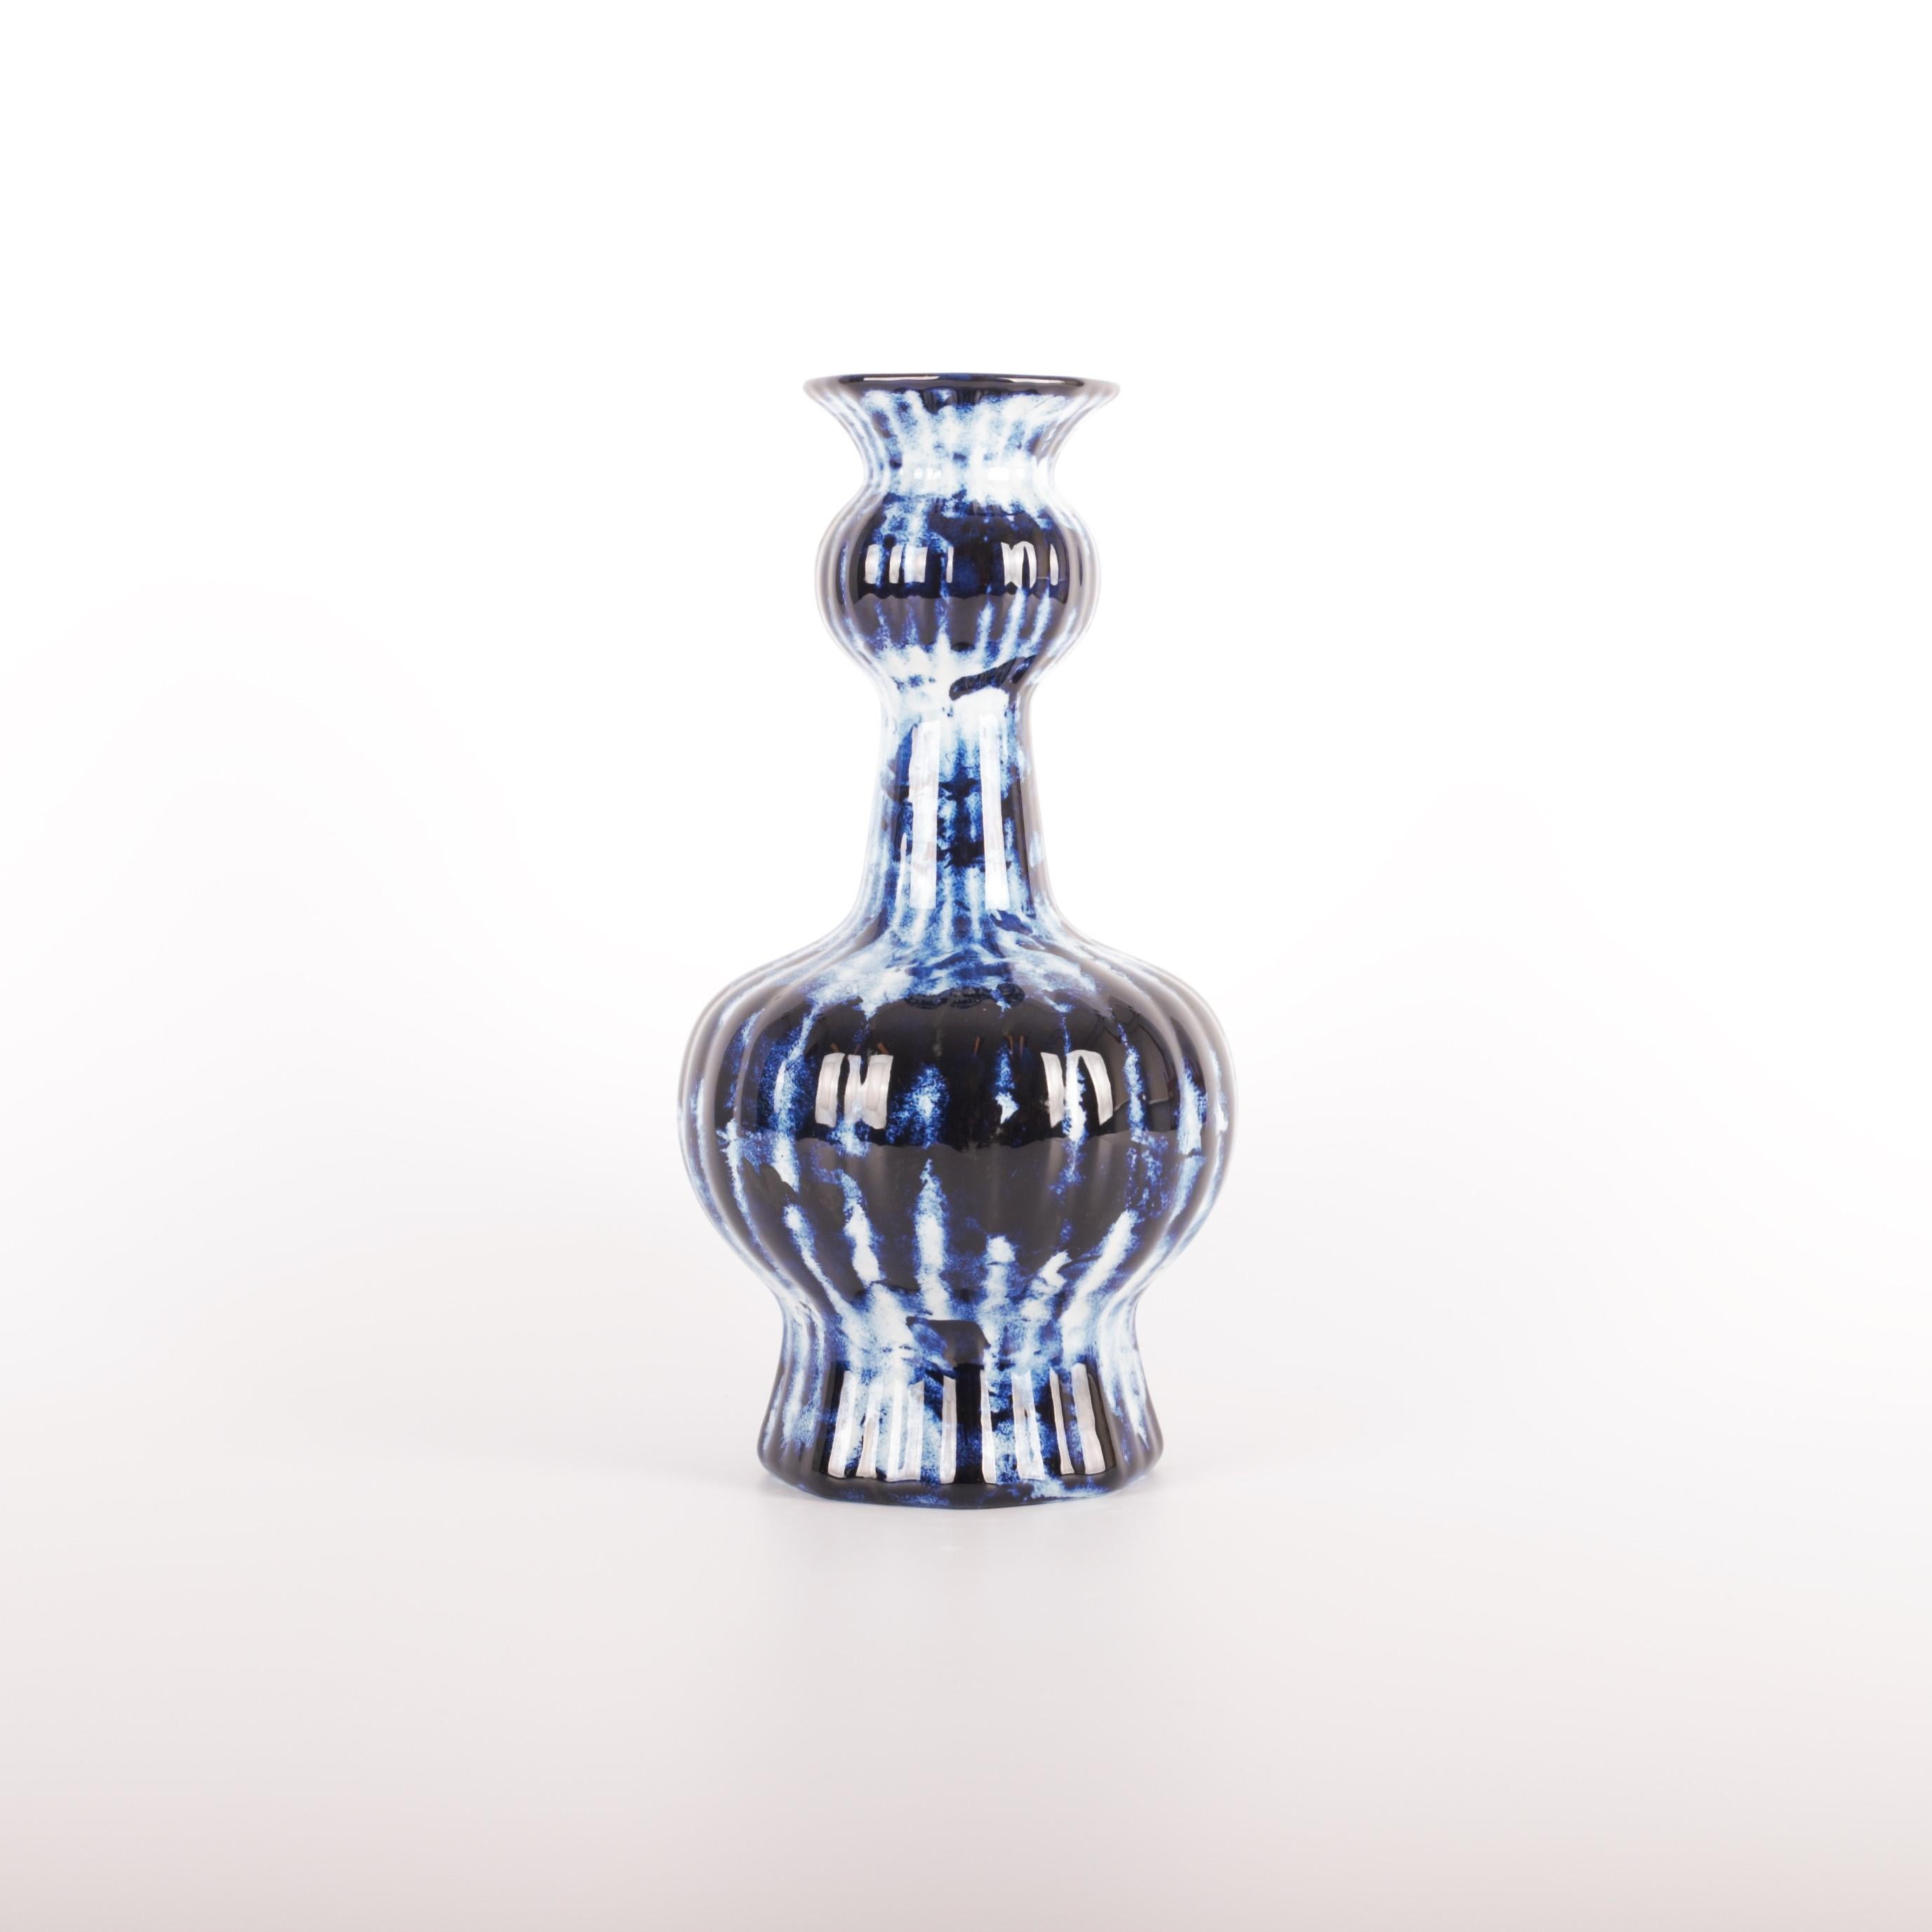 The Delft Blue Longneck Vase is available as an exclusive Personal Edition, Marcel Wanders' label carrying works of a more personal and experimental nature. The pieces of the Delft Blue series are unlimited unique by Marcel's one minute delft blue